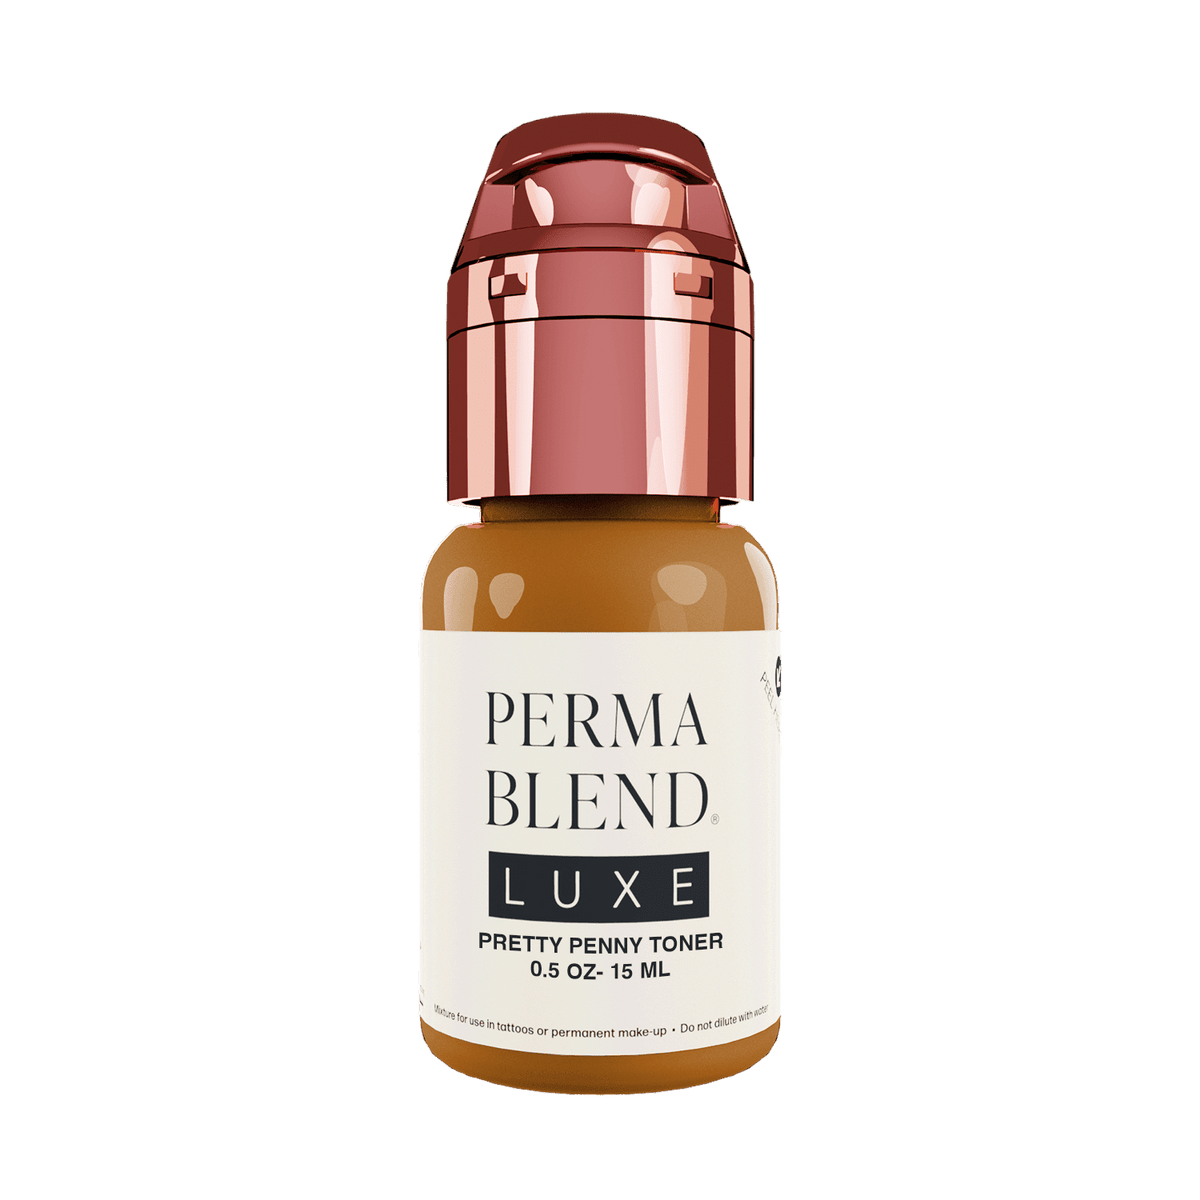 Perma Blend Luxe Pretty penny toner